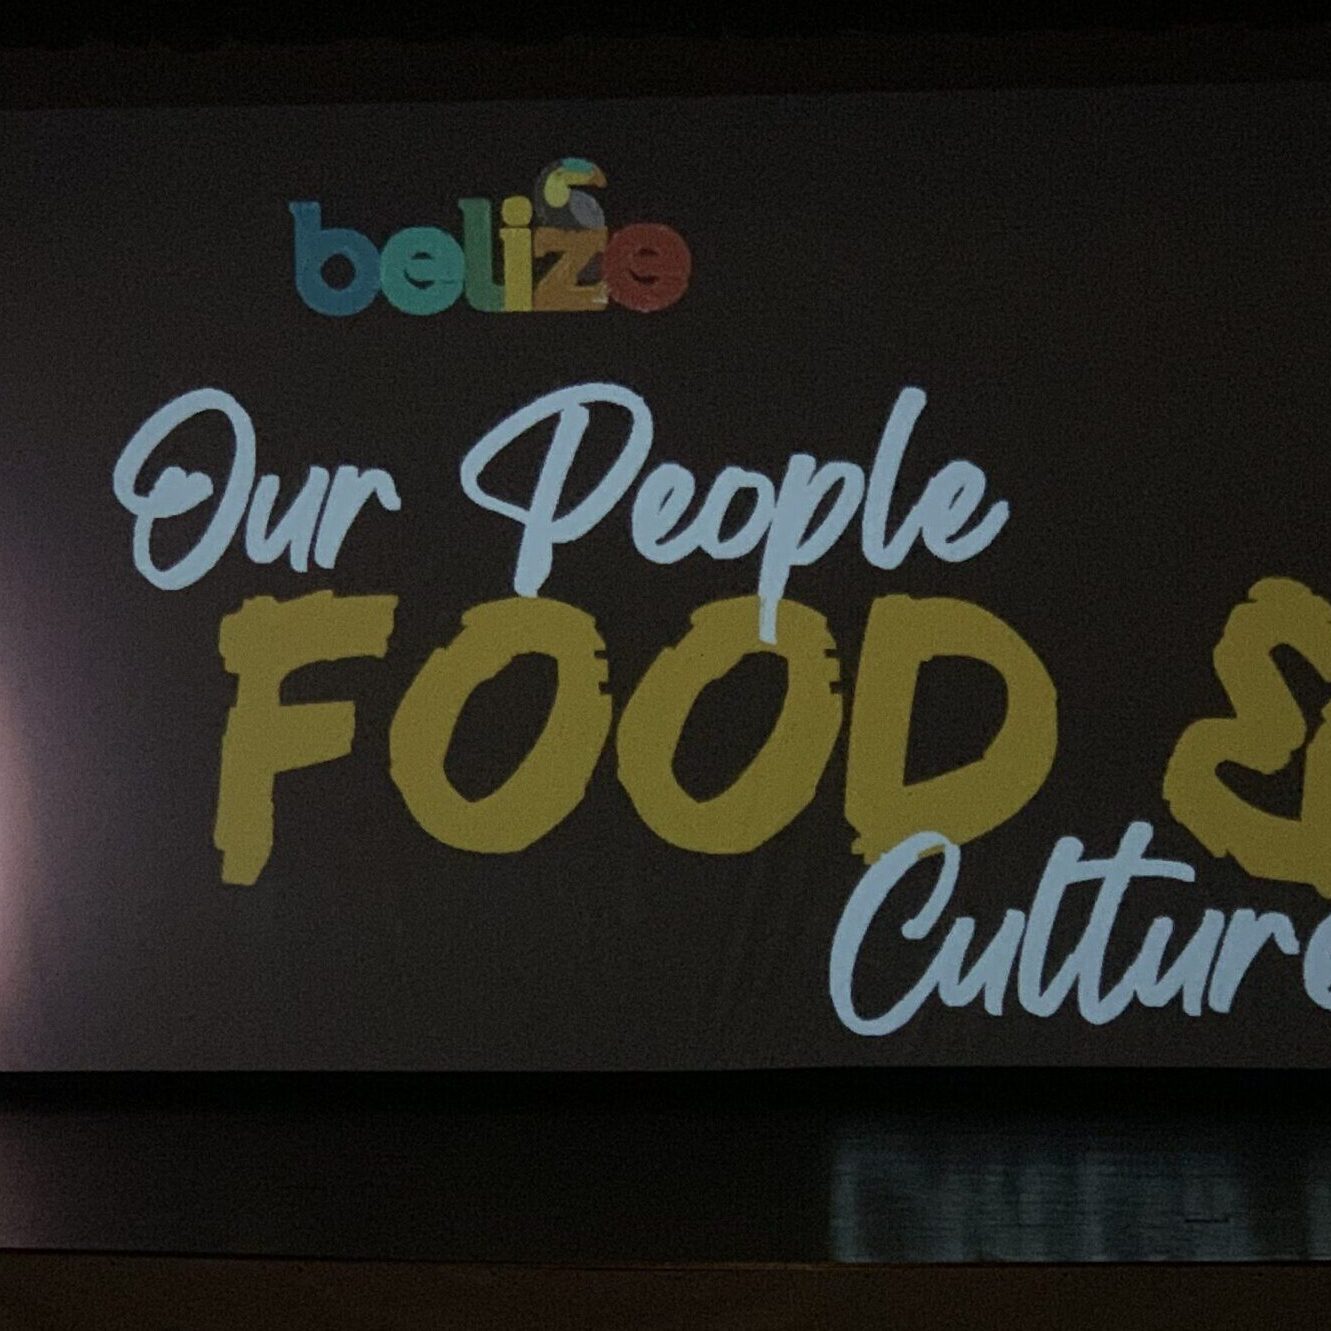 BTB Launches Video Series Highlighting Our People, Food And Culture